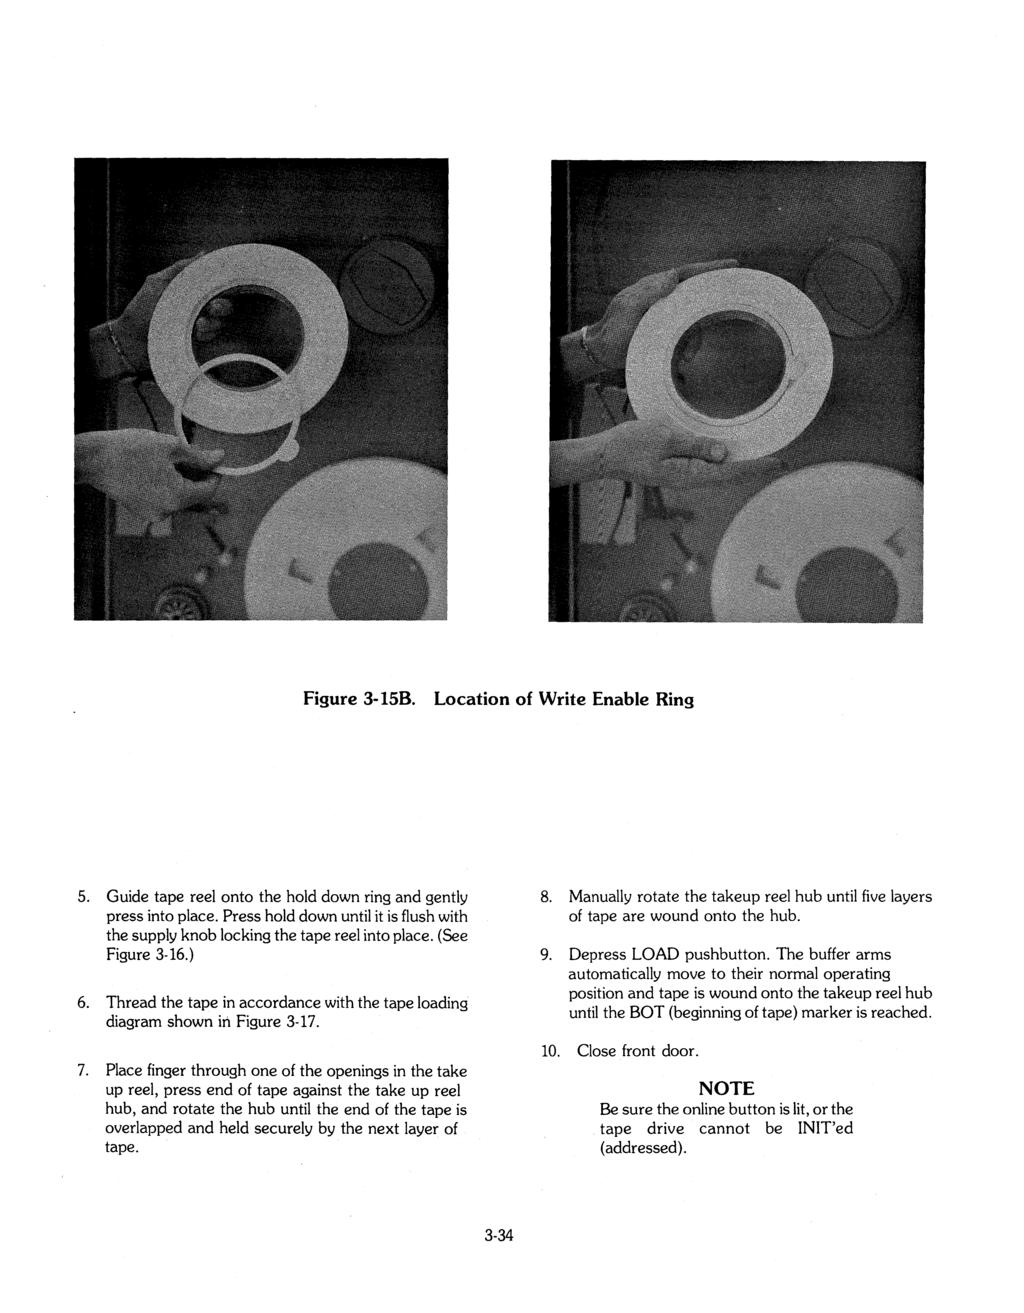 Figure 3-158. Location of Write Enable Ring 5. Guide tape reel onto the hold down ring and gently press into place.